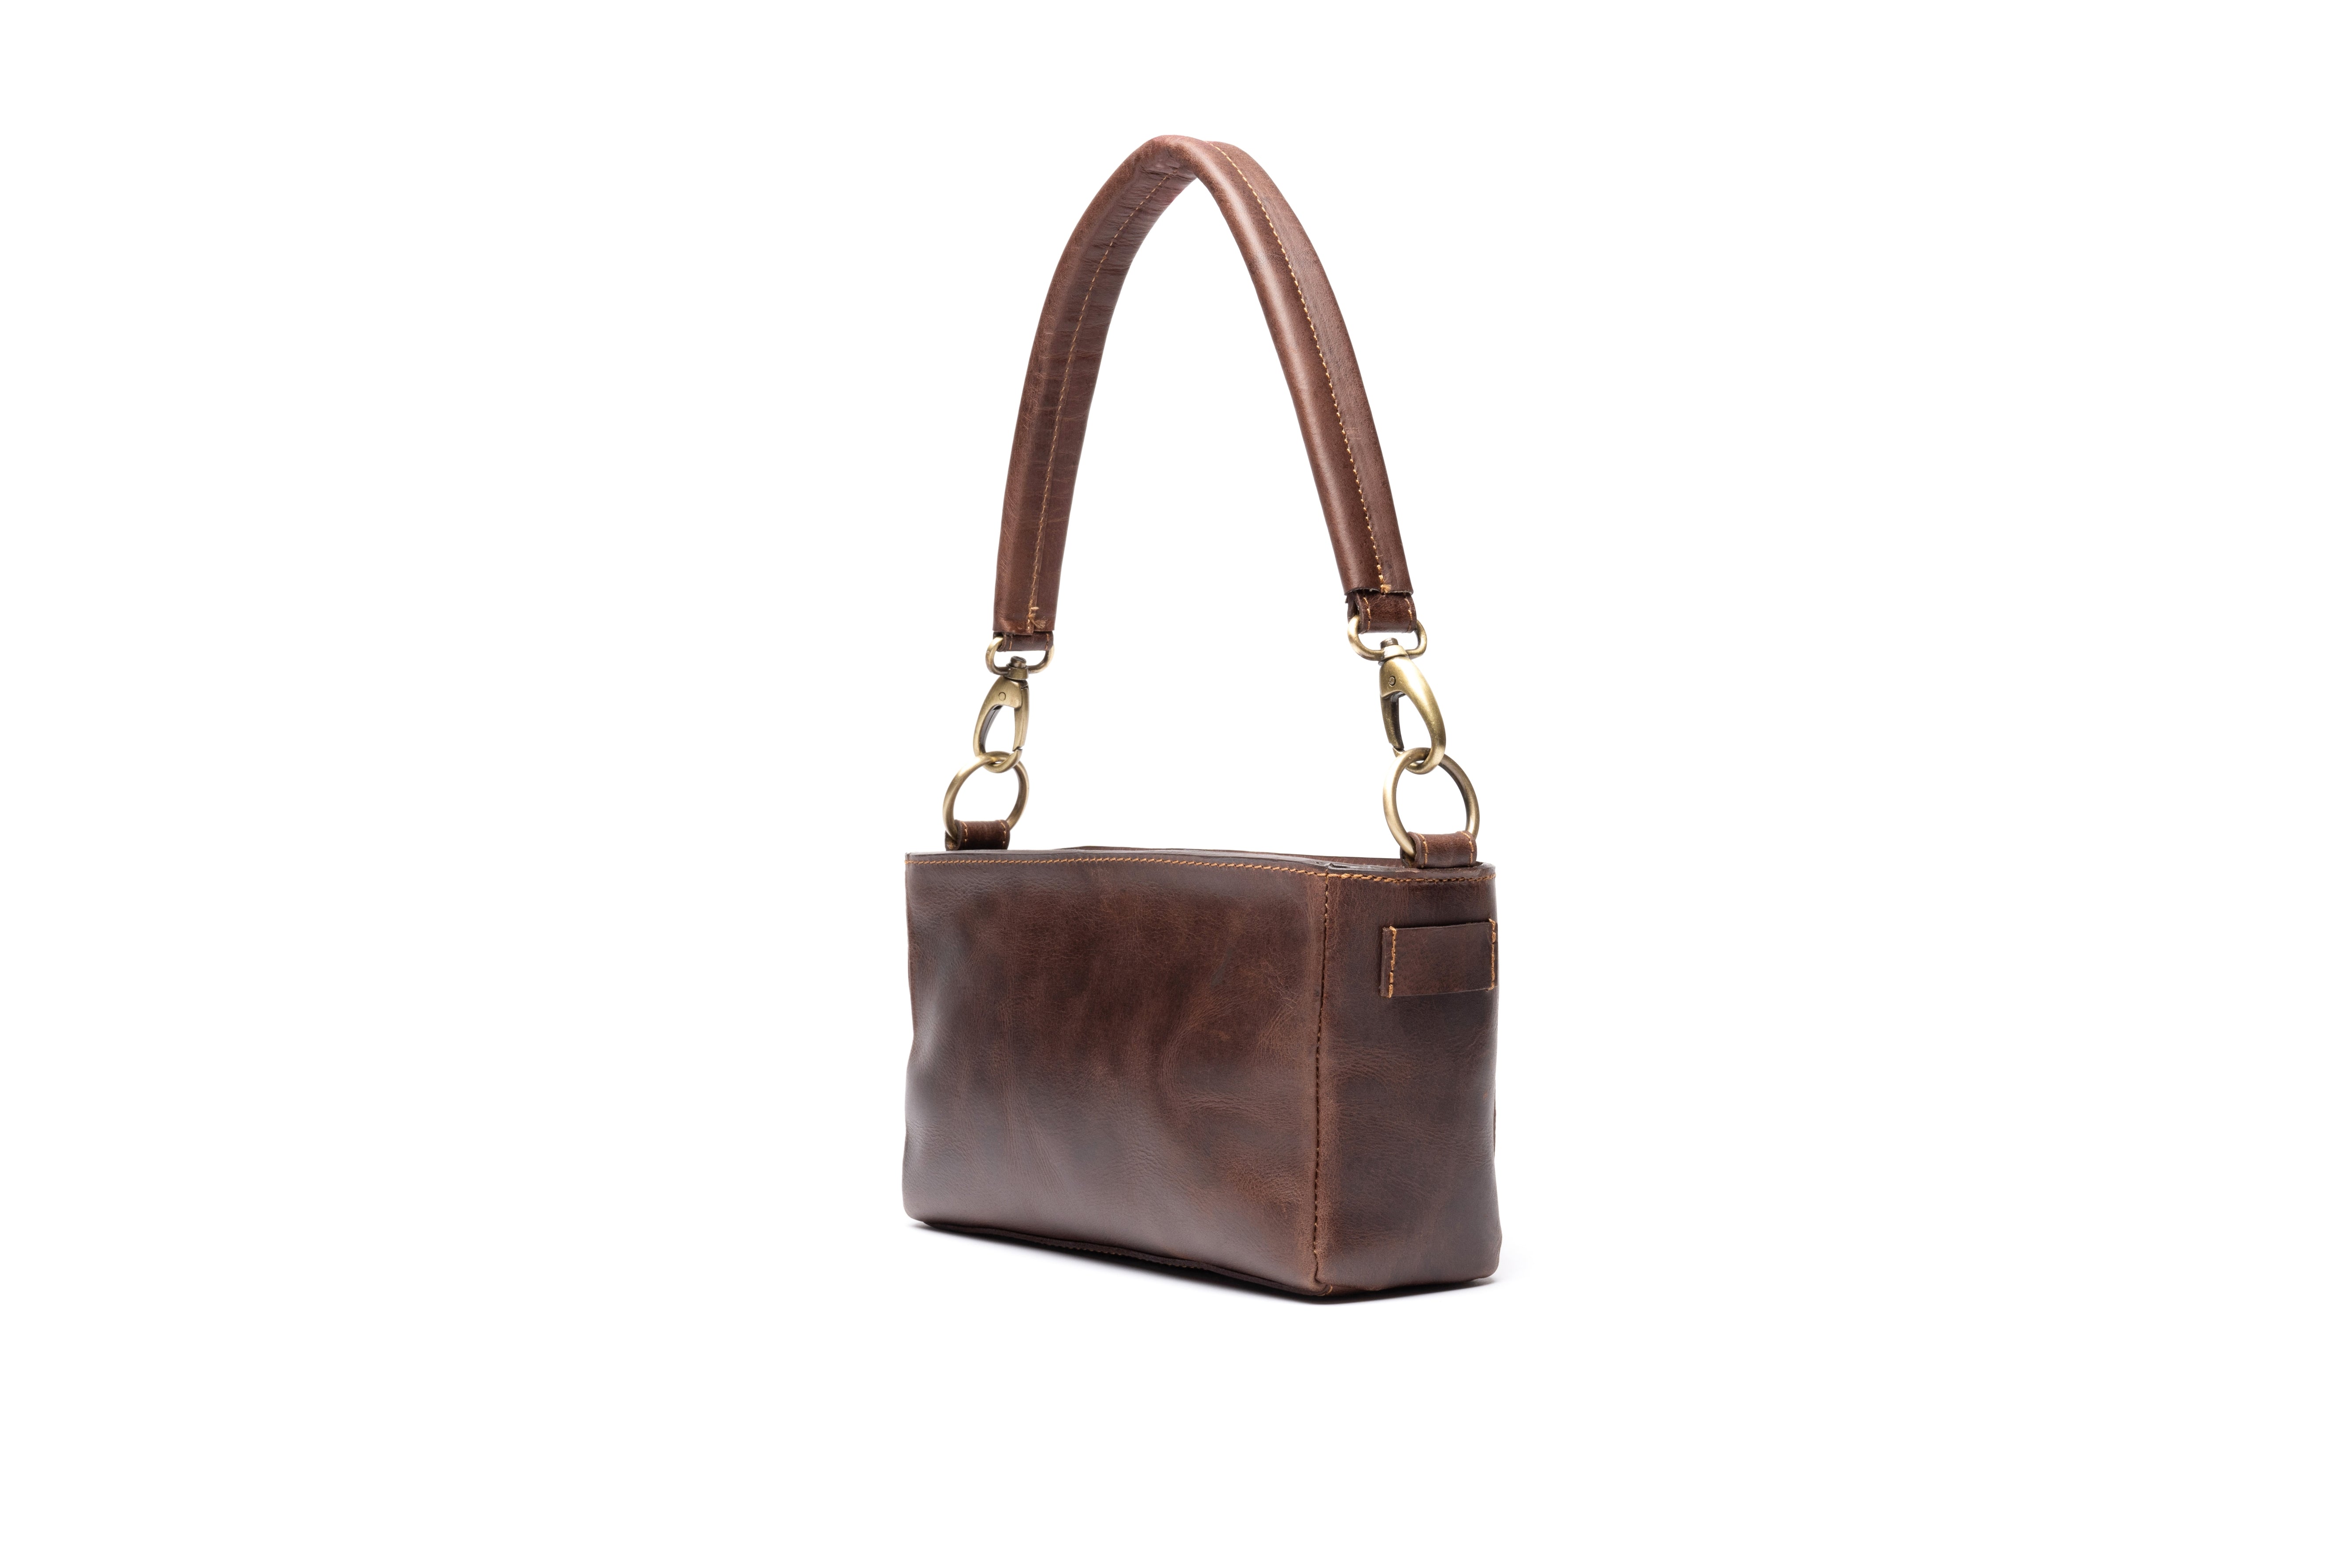 Angle view of Stylish fashionable leather purse with leather handle